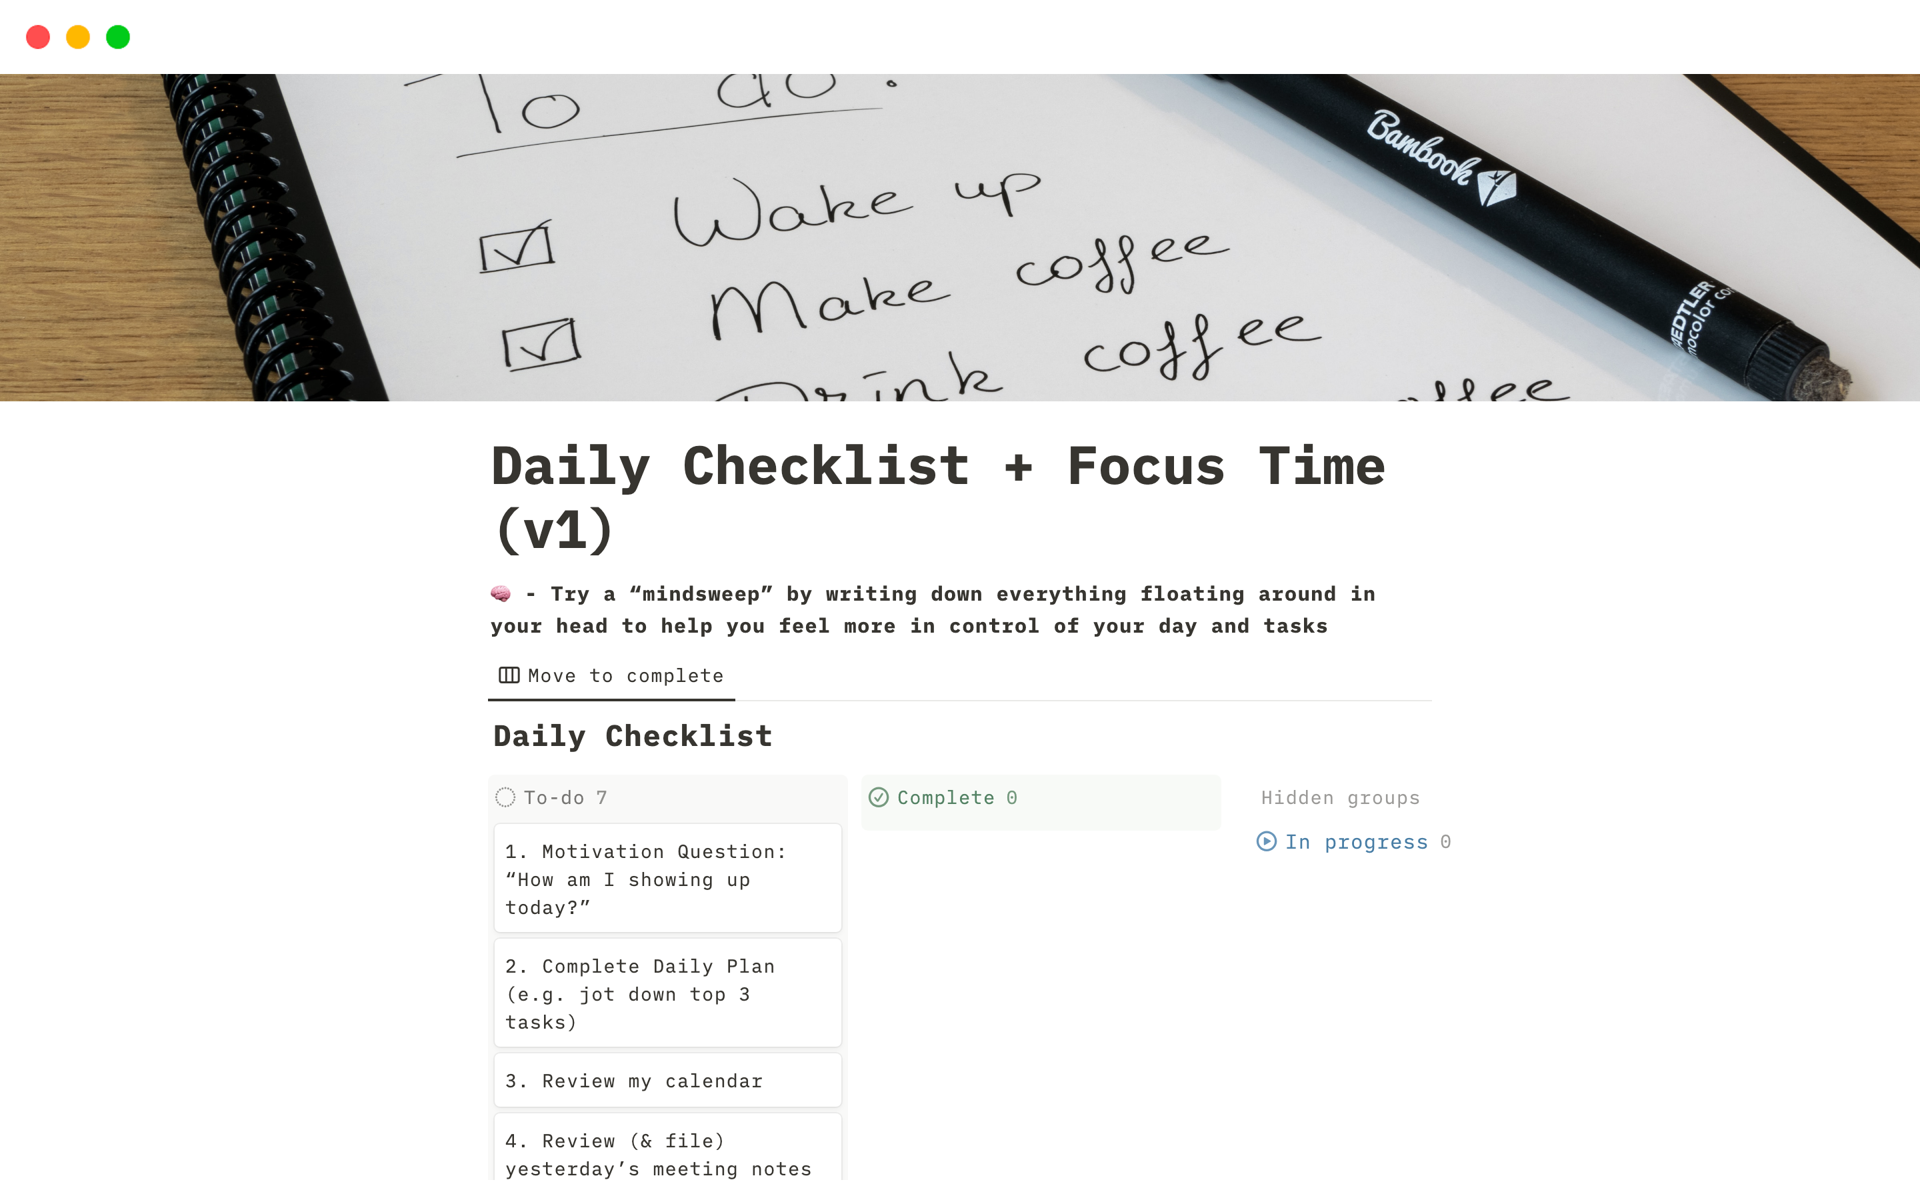 Daily Checklist and Focus Time (v1)のテンプレートのプレビュー